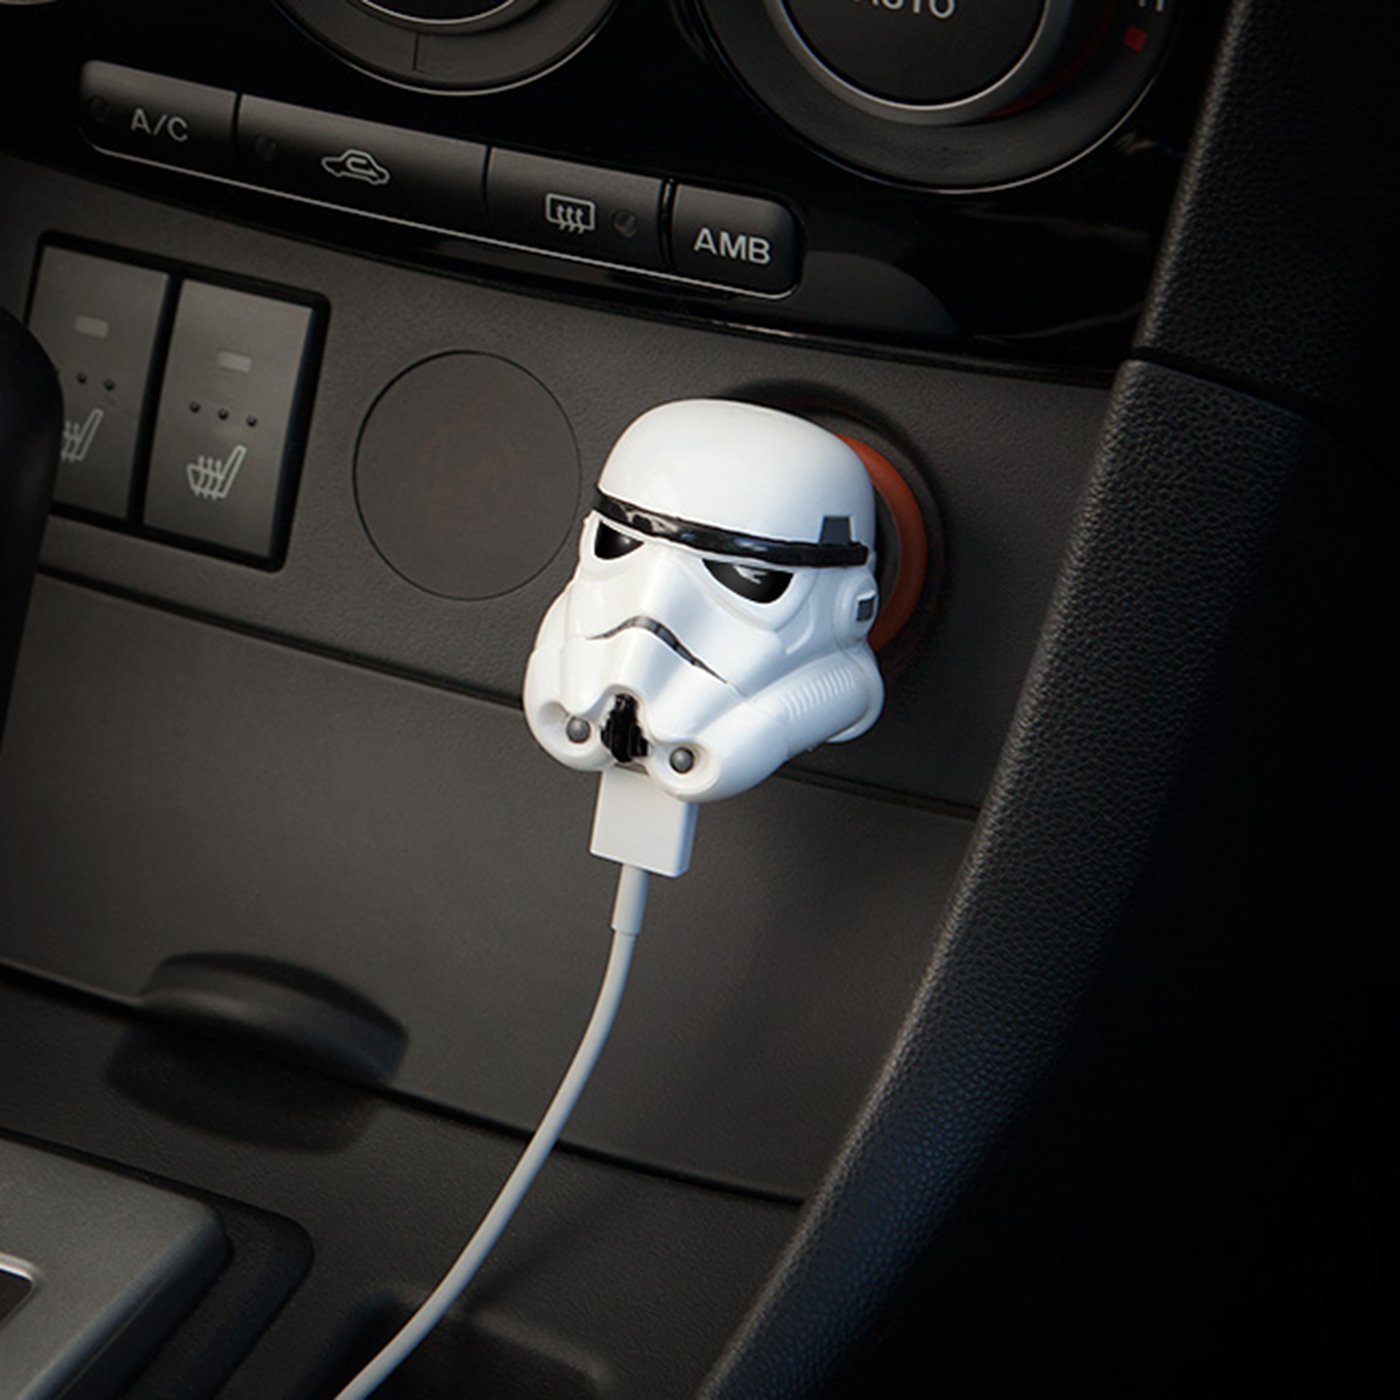 Stormtrooper Car Charger